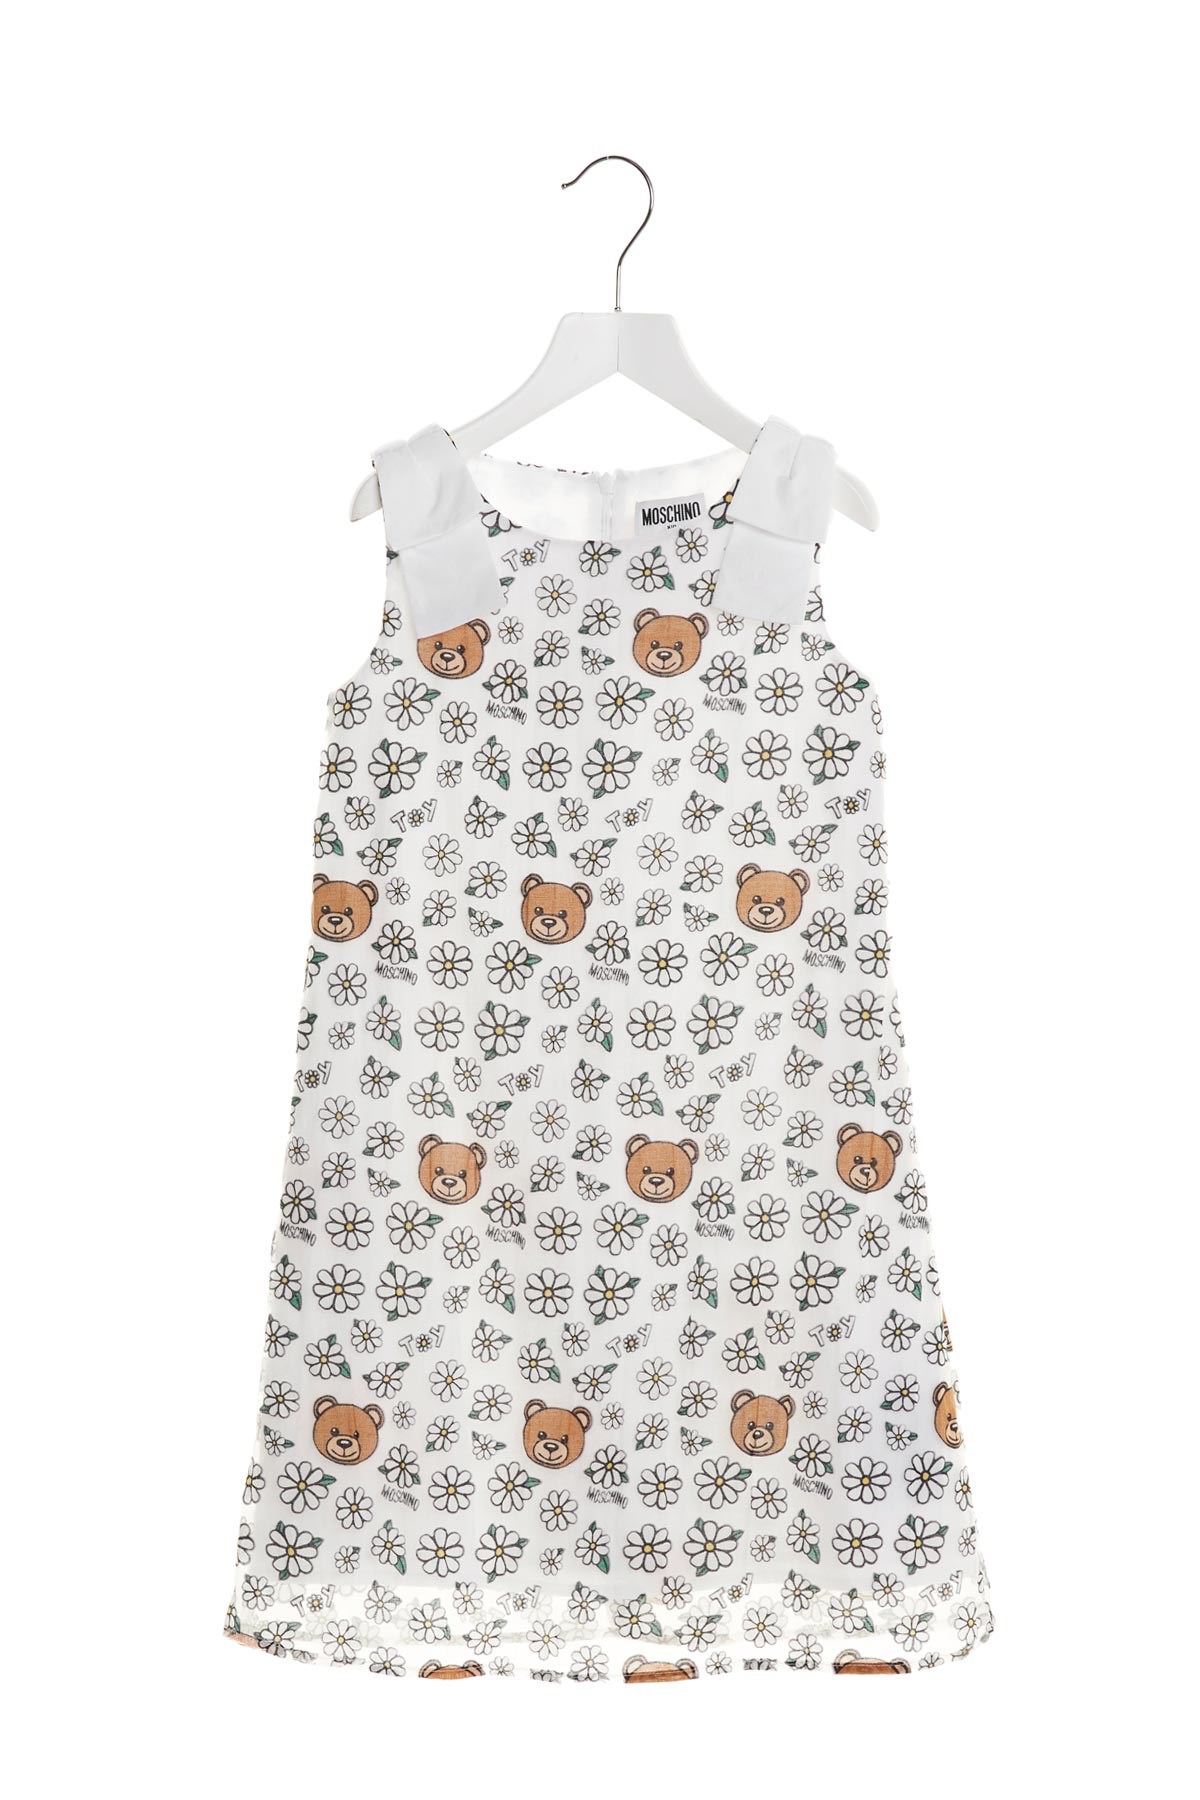 MOSCHINO KID TEEN Floral Printed Dress